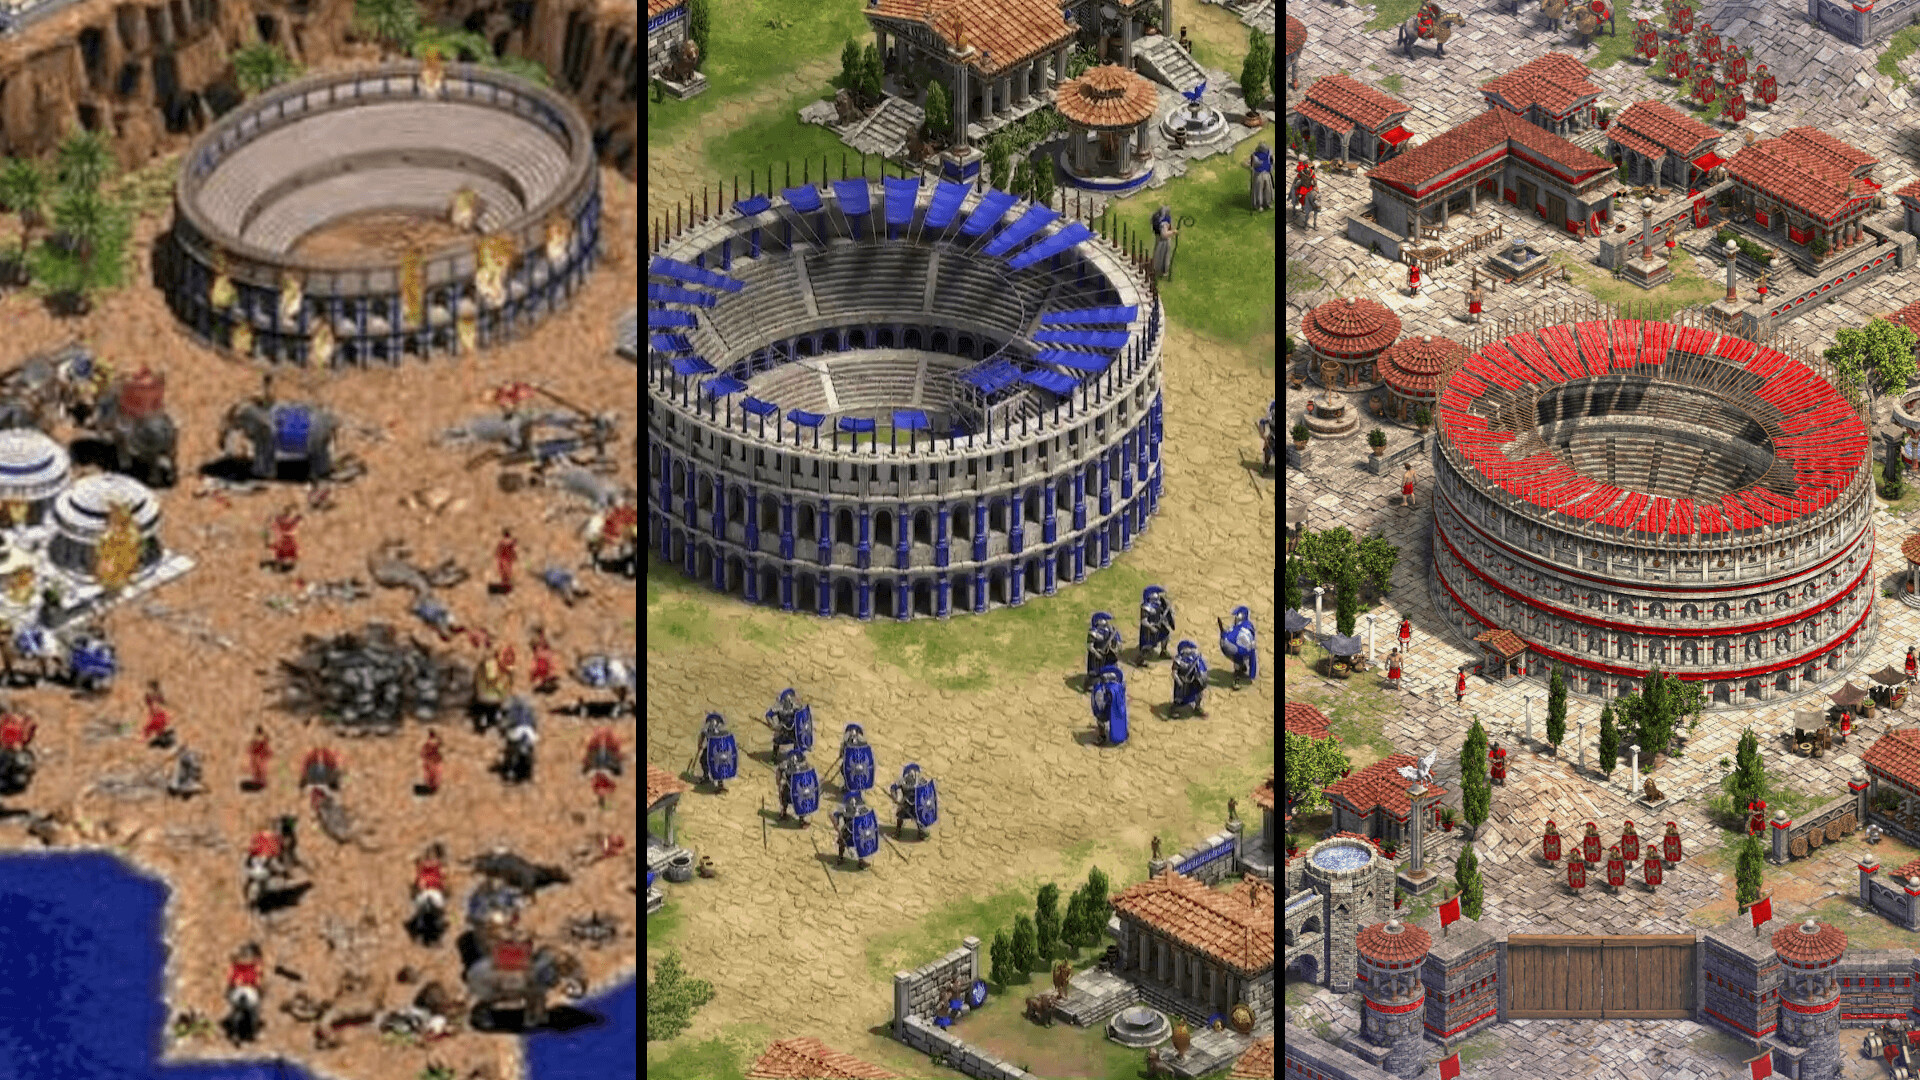 Age of Empires II Definitive Edition Return of Rome Expansion will Bring Back Classic RTS Memories - returnal